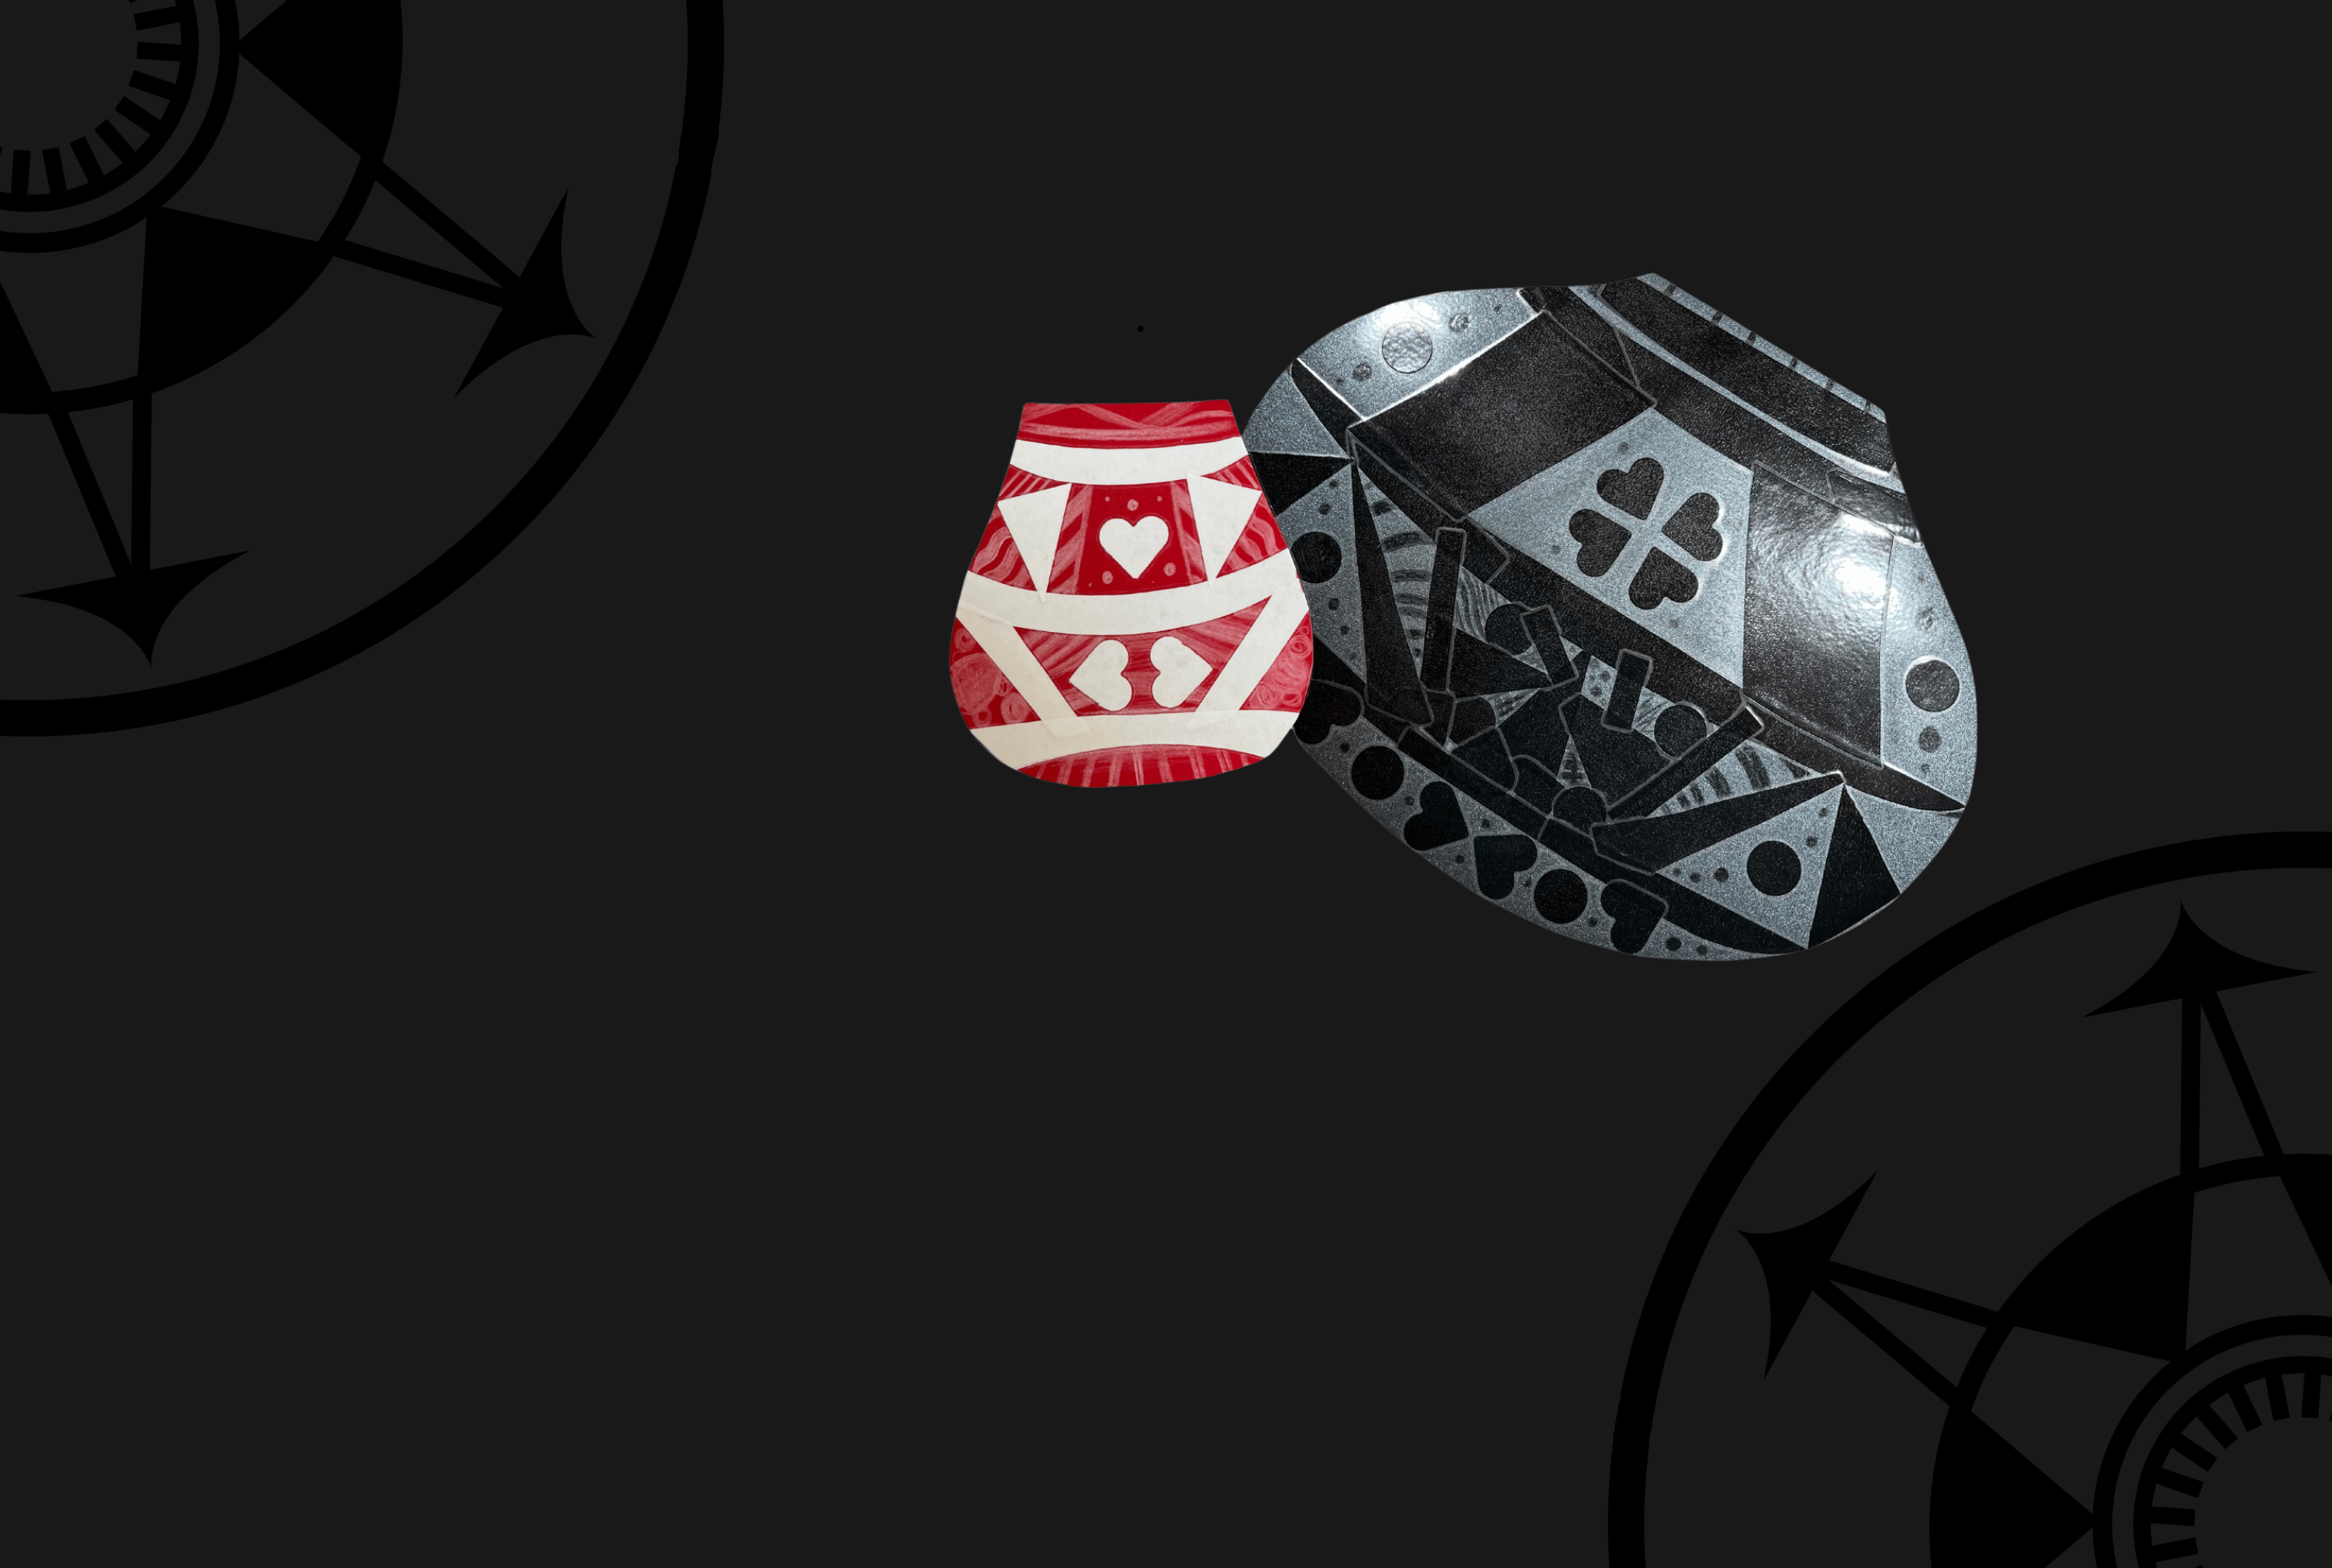 Two geometrically patterned shields, one red and one gray, displayed against a dark background with compass motifs.